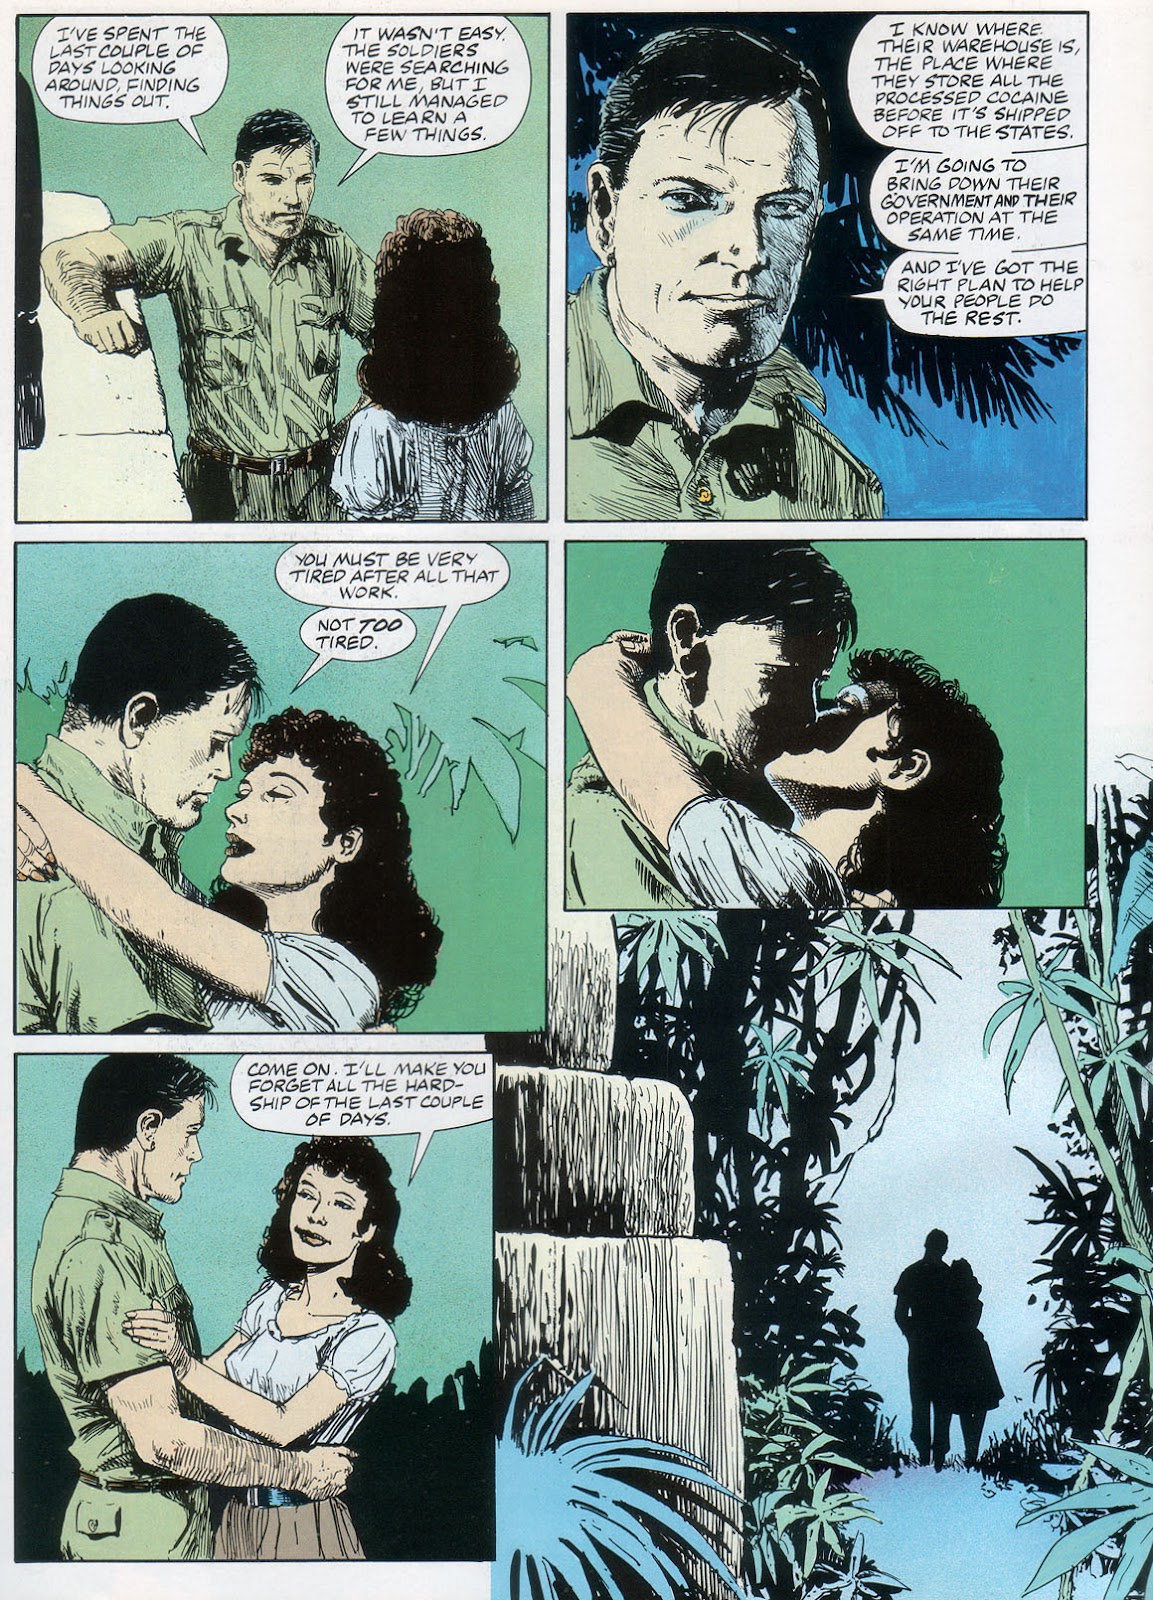 Marvel Graphic Novel issue 57 - Rick Mason - The Agent - Page 67